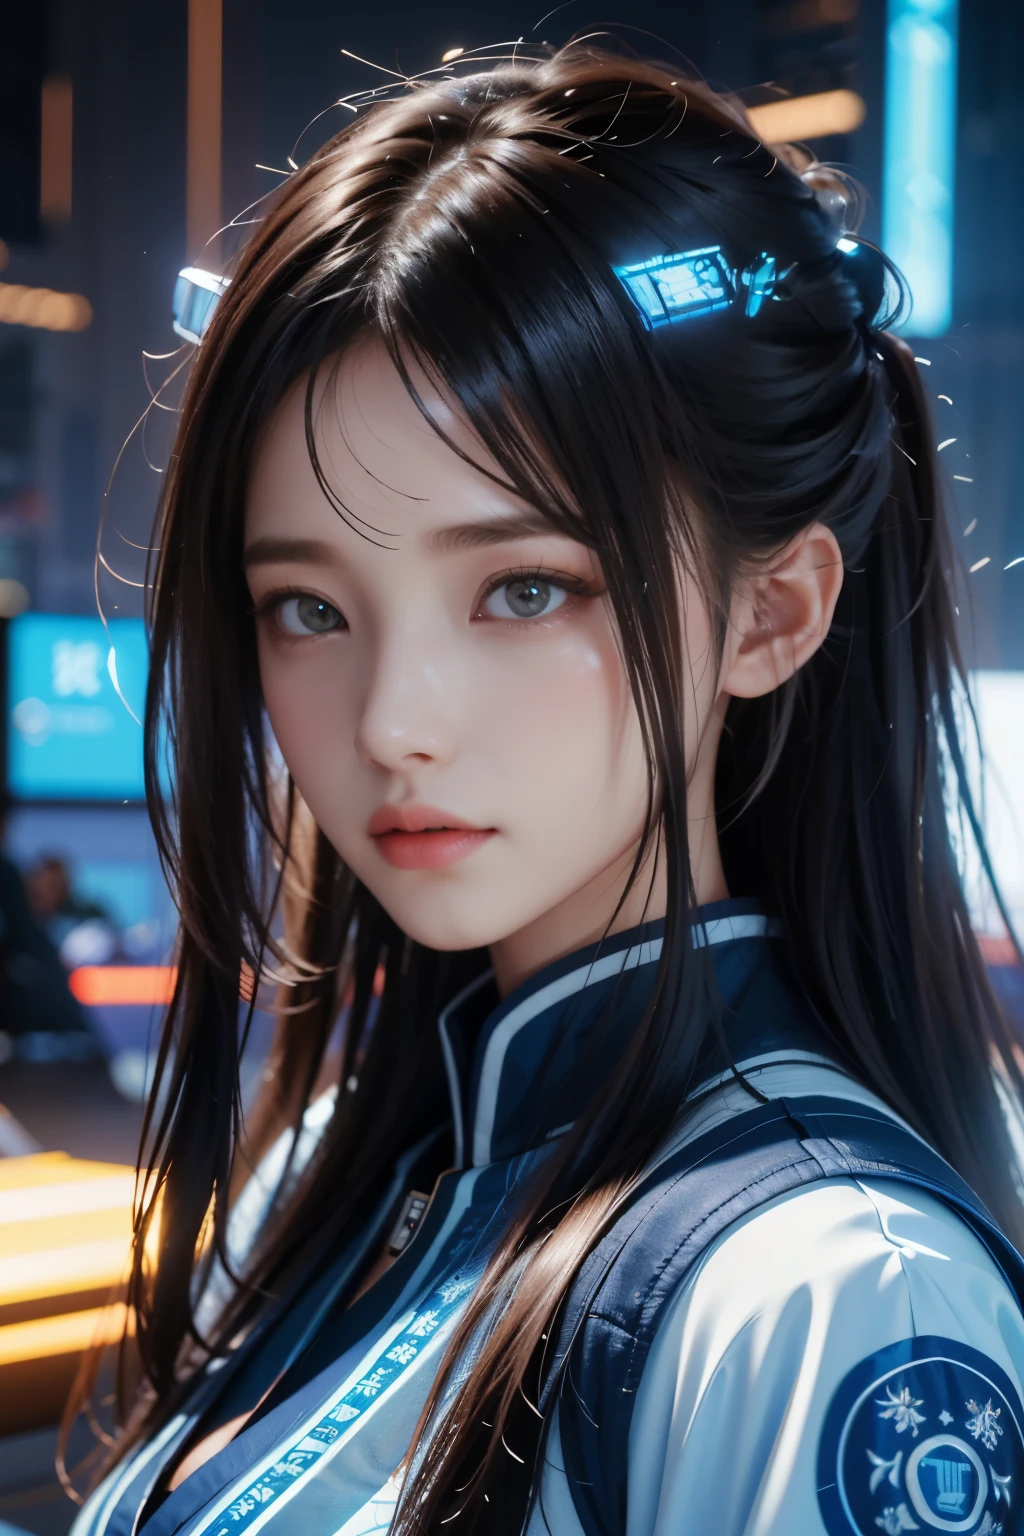 Masterpiece，The best qualities，Very high resolution，8K，((Portrait))，((Head close-up))，Original photo，real photo，Digital Photography， (Cyberpunk-style female cops of the future world)，(Fighting girl)，22-year-old girl，(Long hair in a casual style，blue)，An eye rich in detail，((Lachrymal nevus))，lip gloss，(Elegant and charming，Indifferent and noble)，(Futuristic electronic style clothing，Complex electronic pattern designcient and mysterious pattern)，Cyberpunk Characters，Future Style， Photo poses，Street background，Movie lights，Ray tracing，Game CG，((3D Unreal Engine))，oc rendering reflection texture